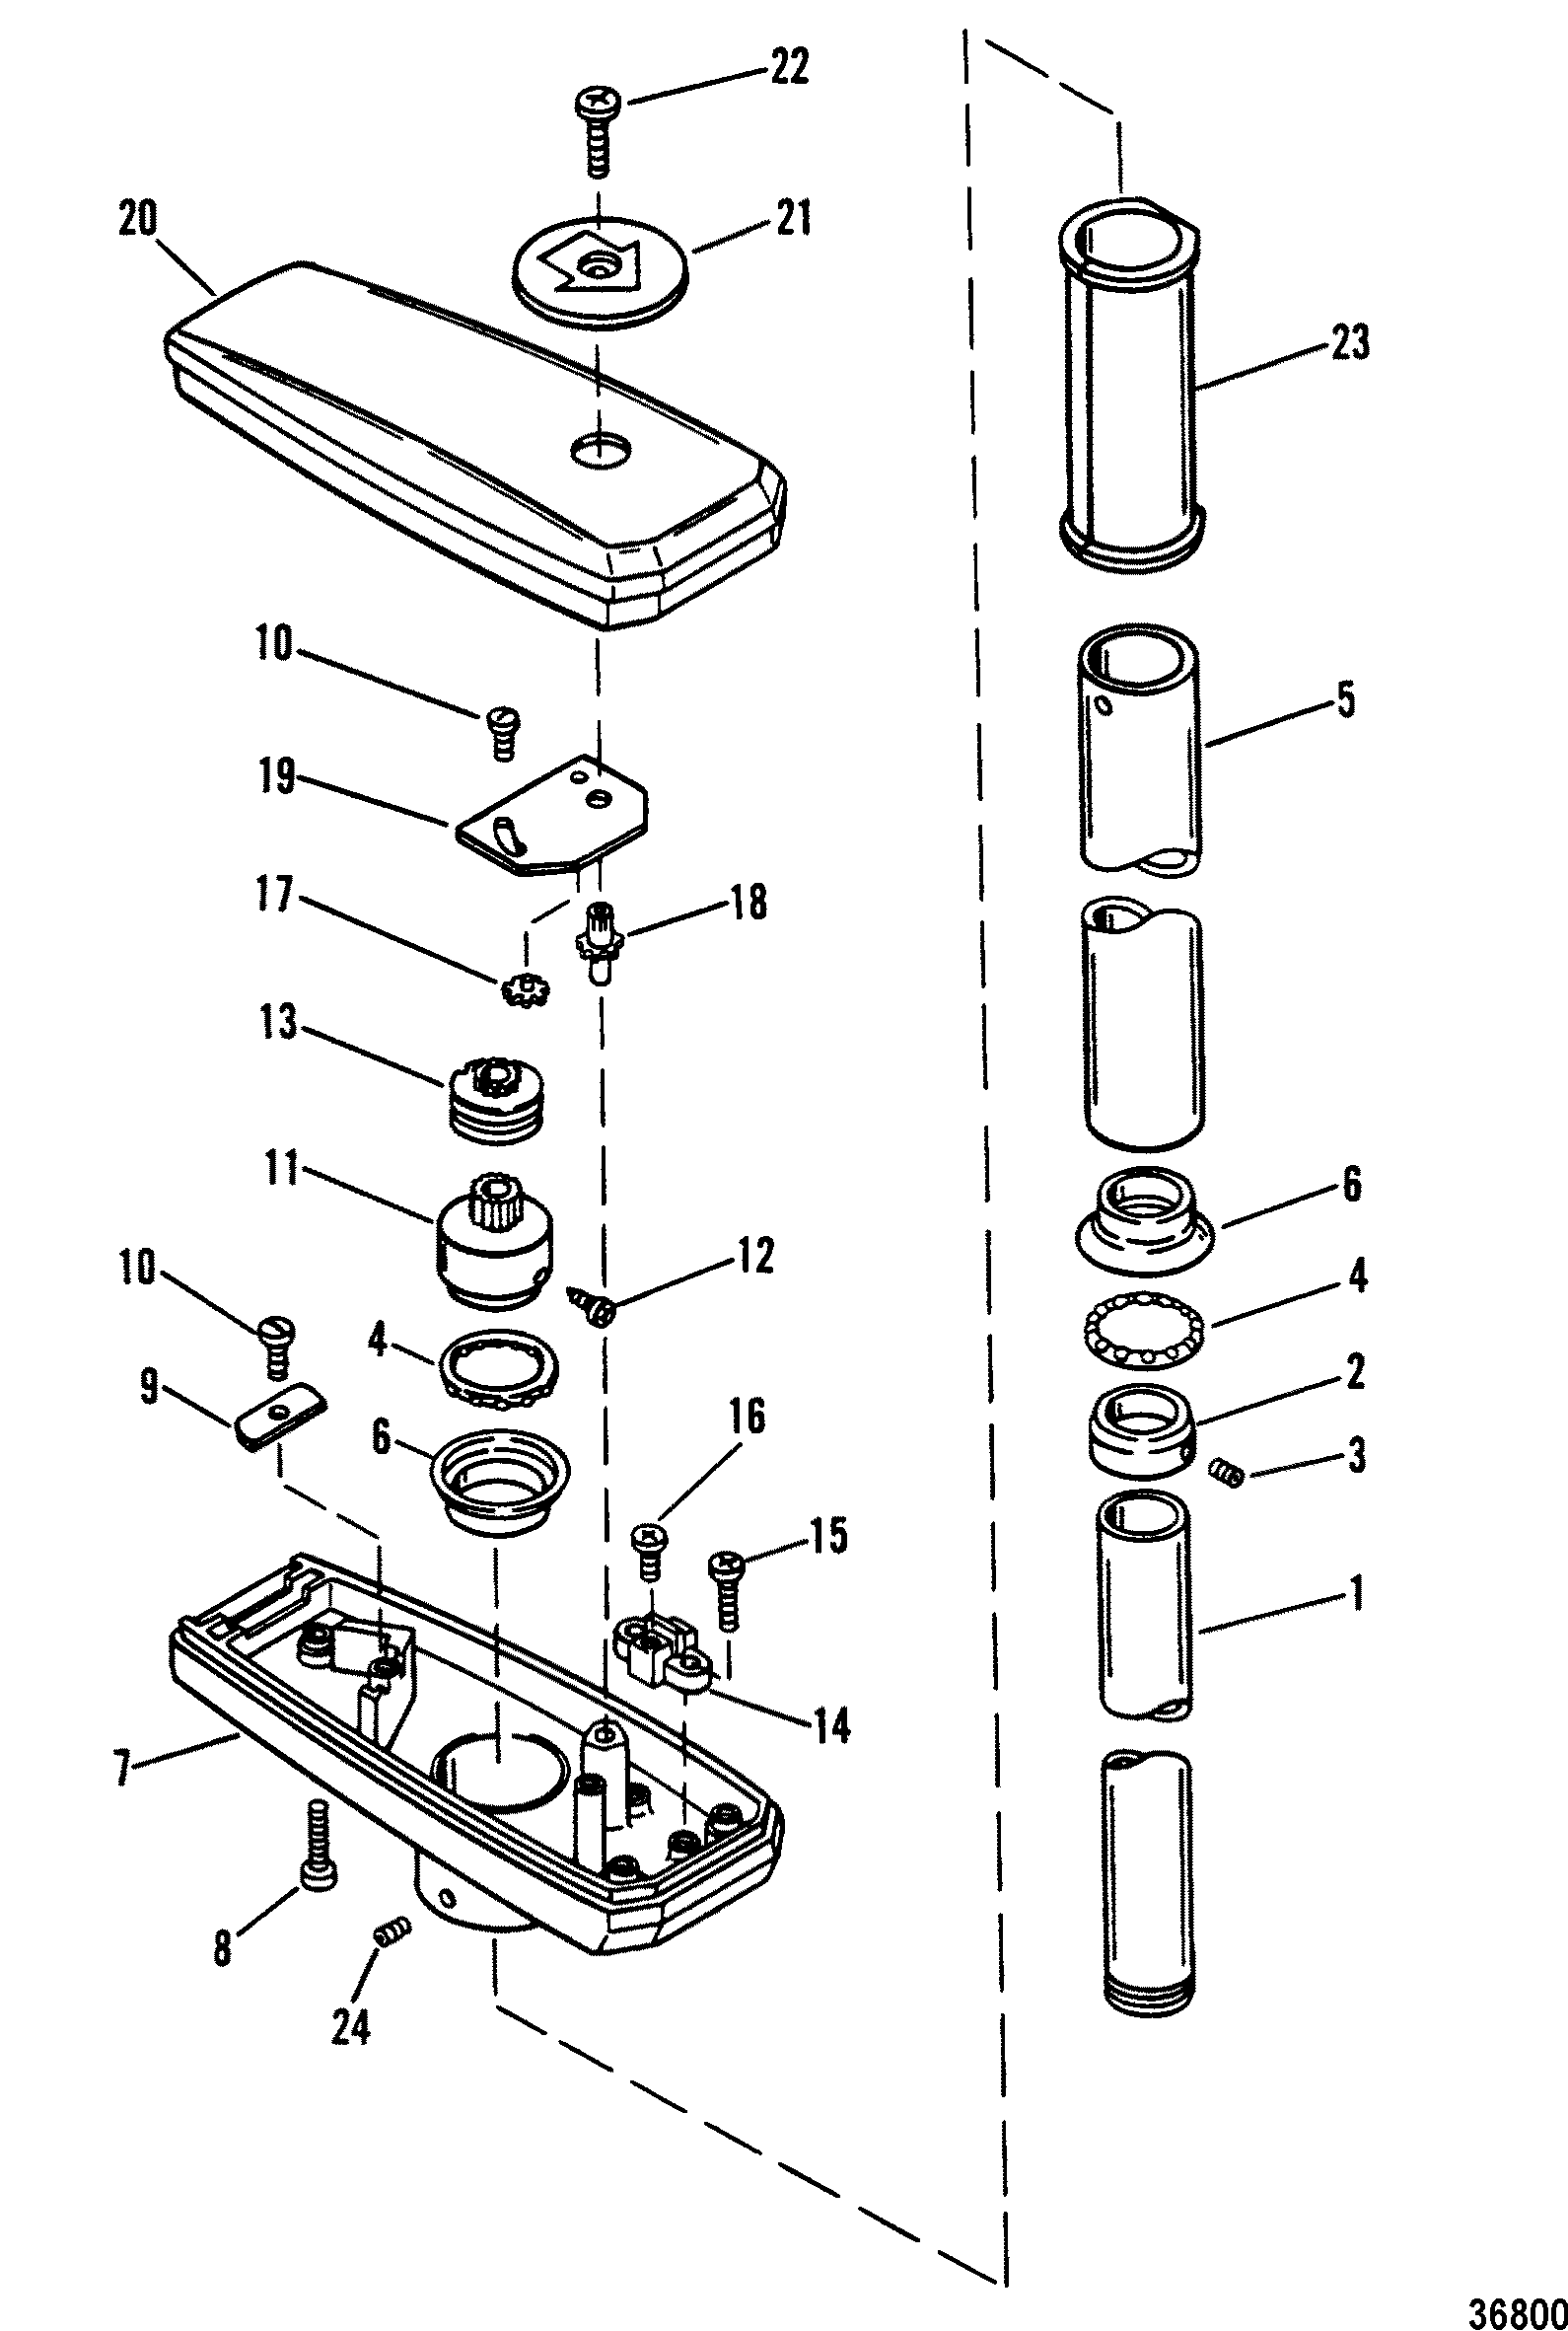 DRIVESHAFT AND CONTROL HOUSING(Remote)